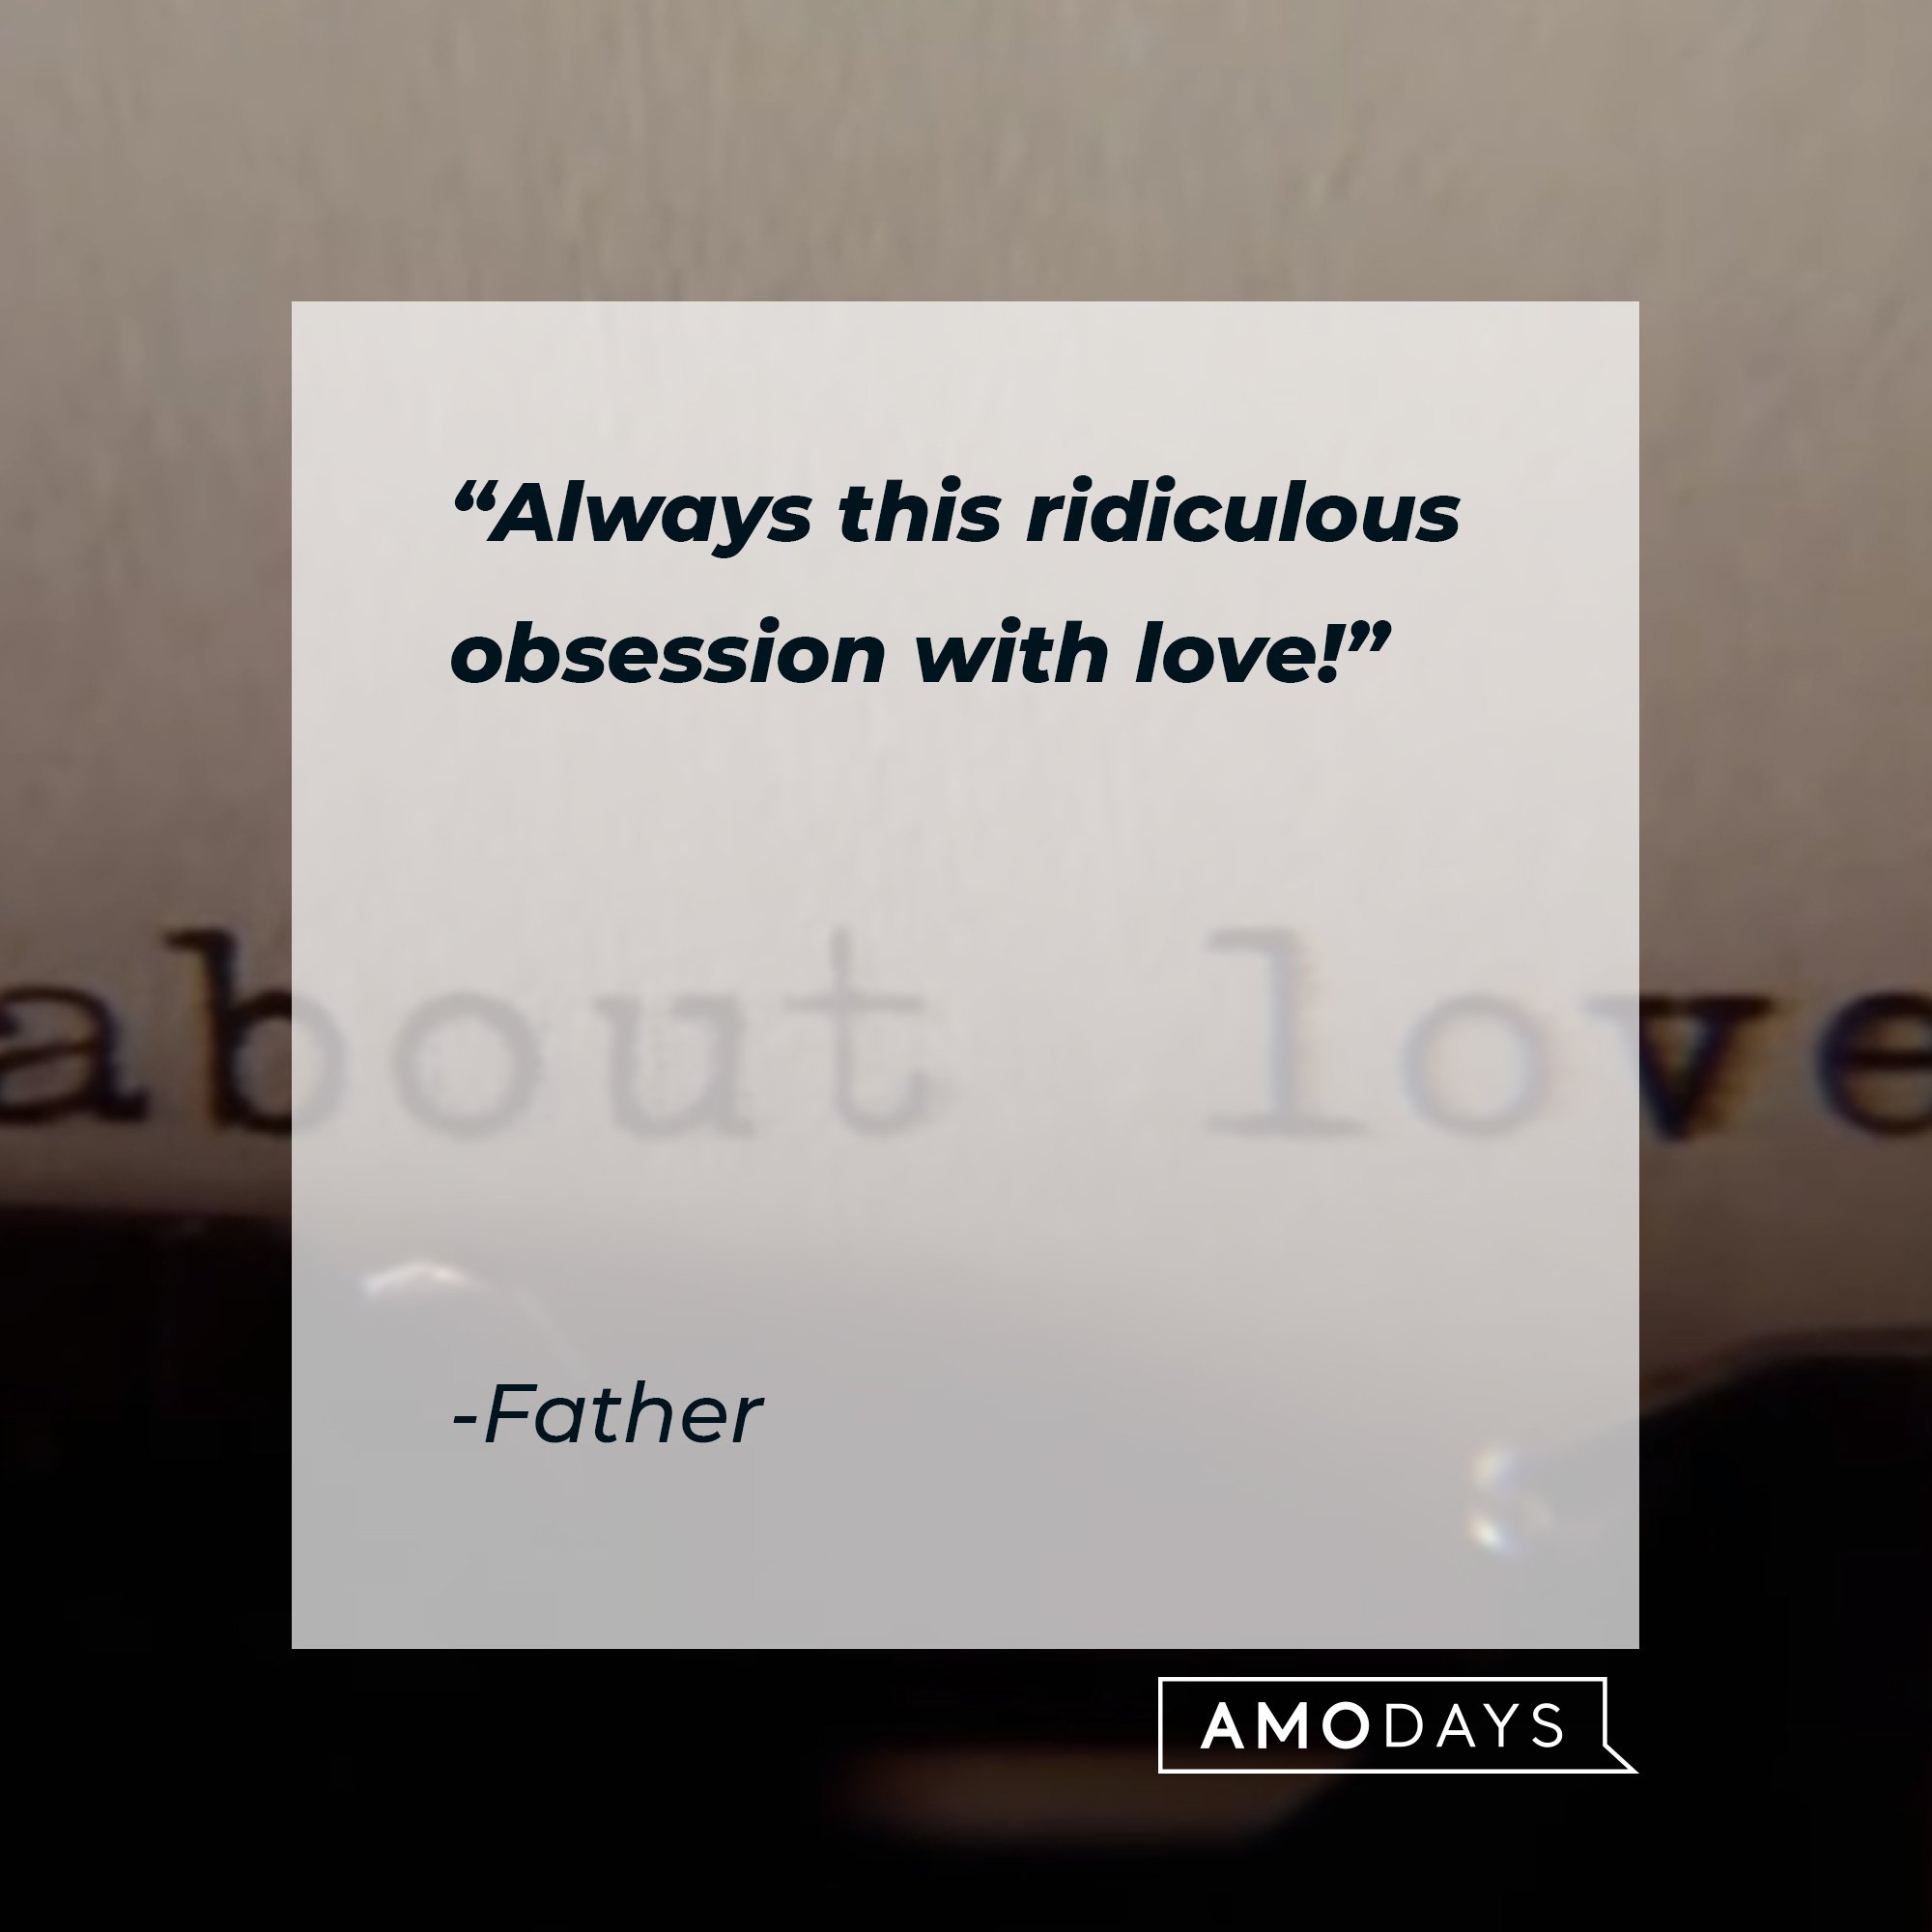 Father's quote: "Always this ridiculous obsession with love!” | Image: AmoDays